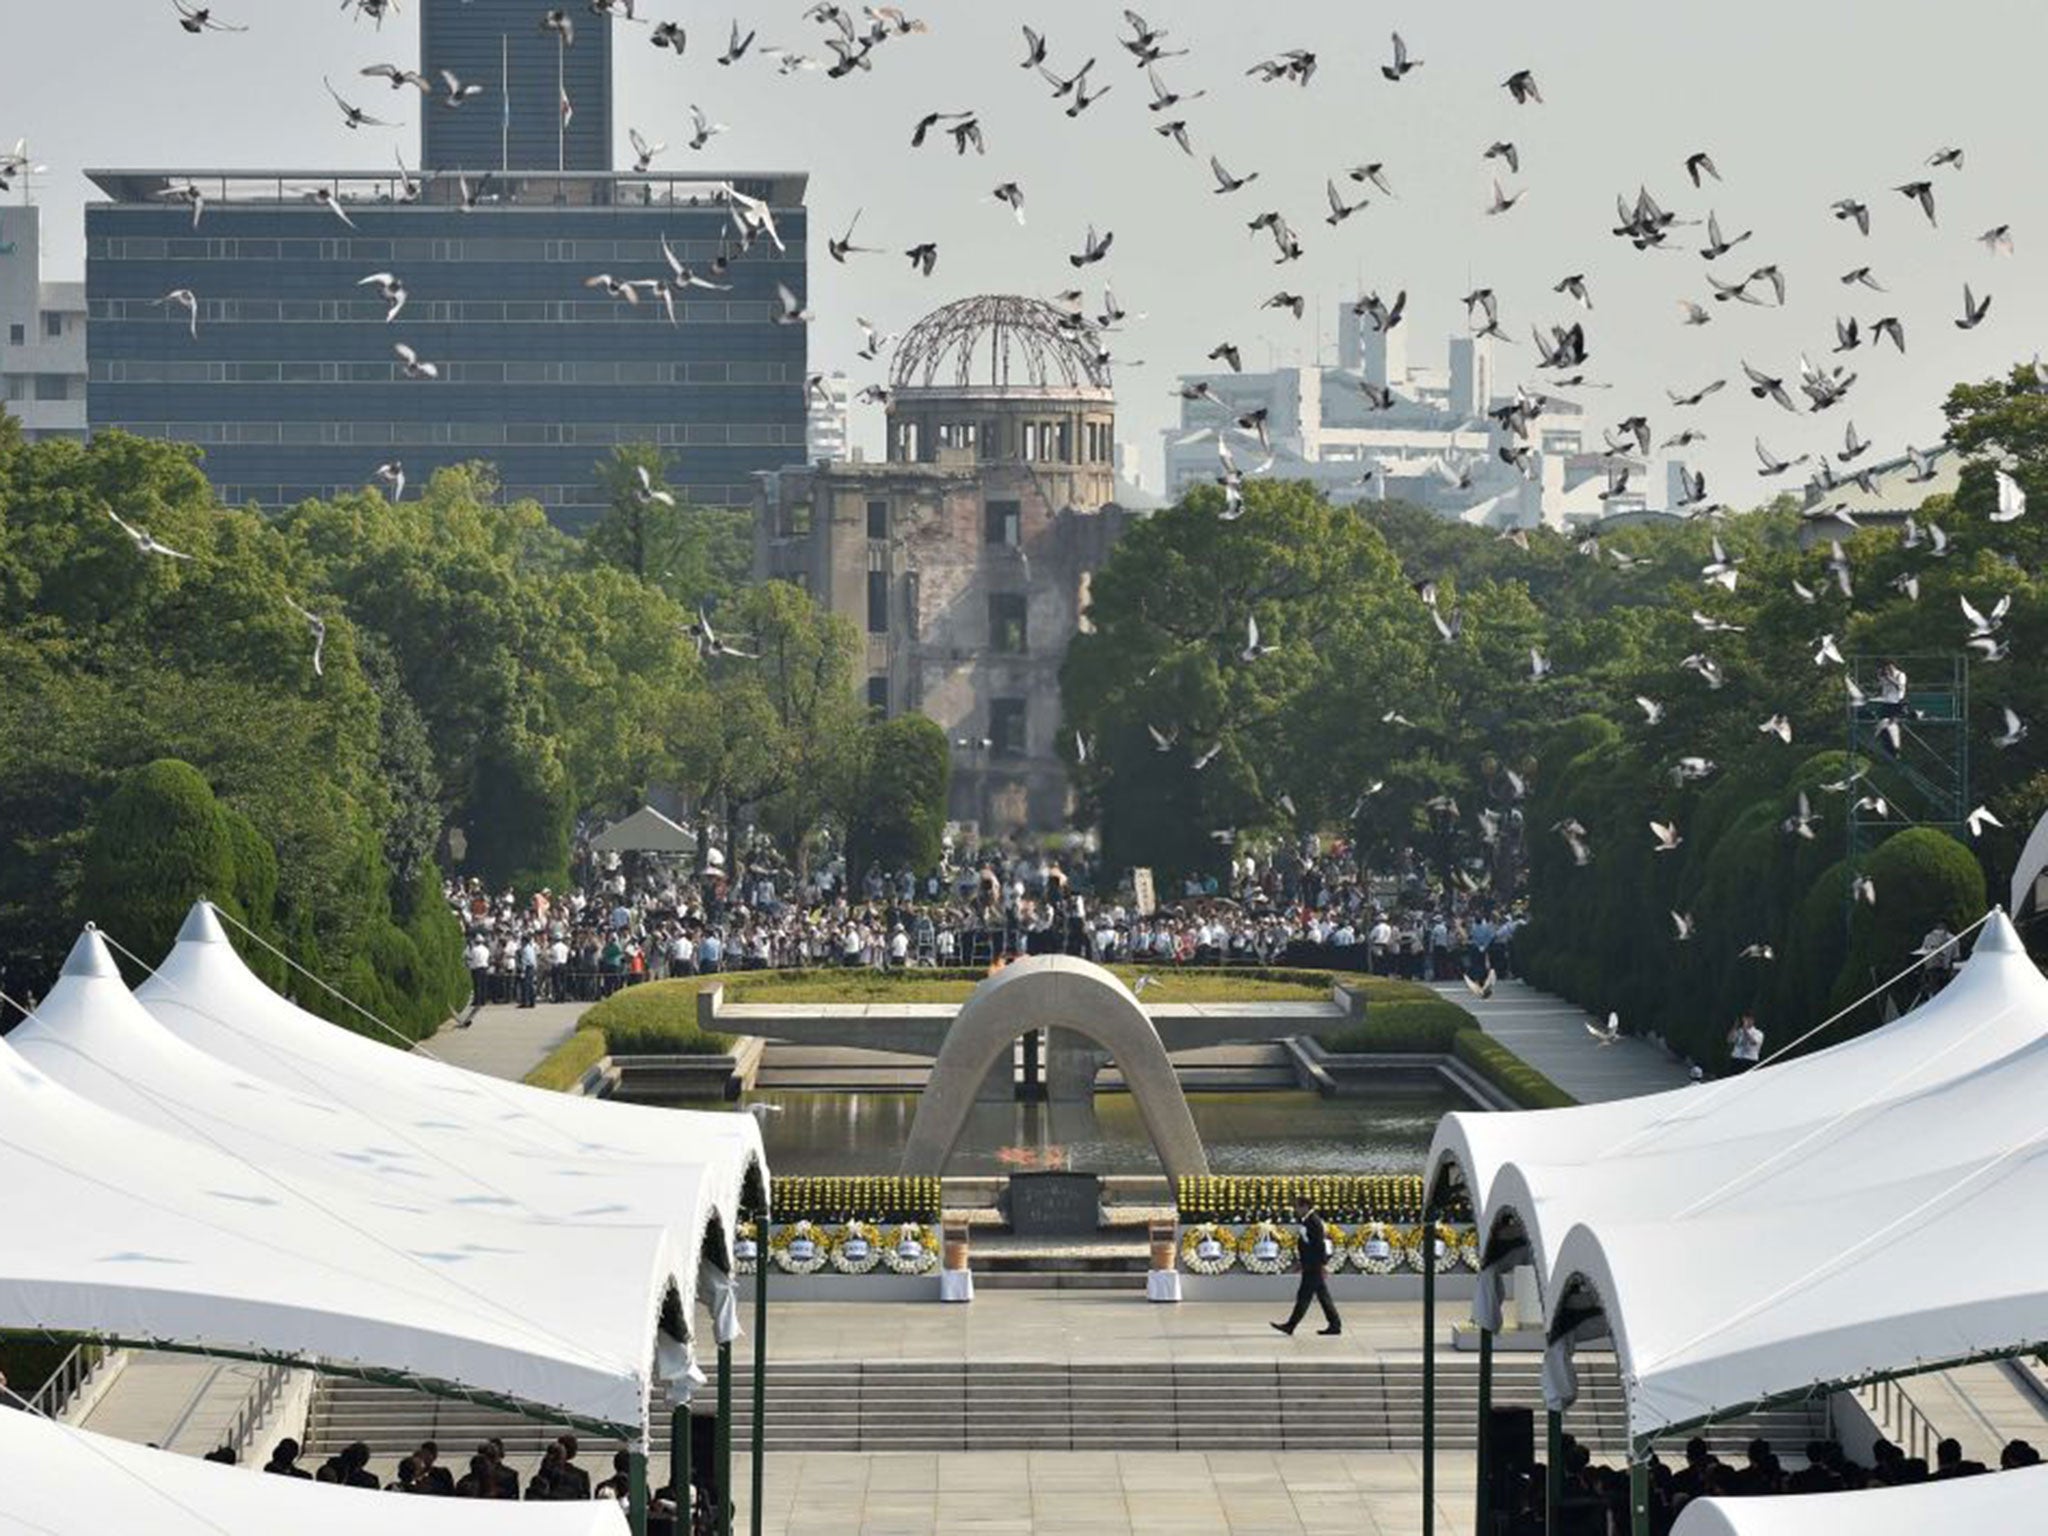 Doves fly over the Hiroshima Peace Memorial Park in western Japan on August 6, 2015